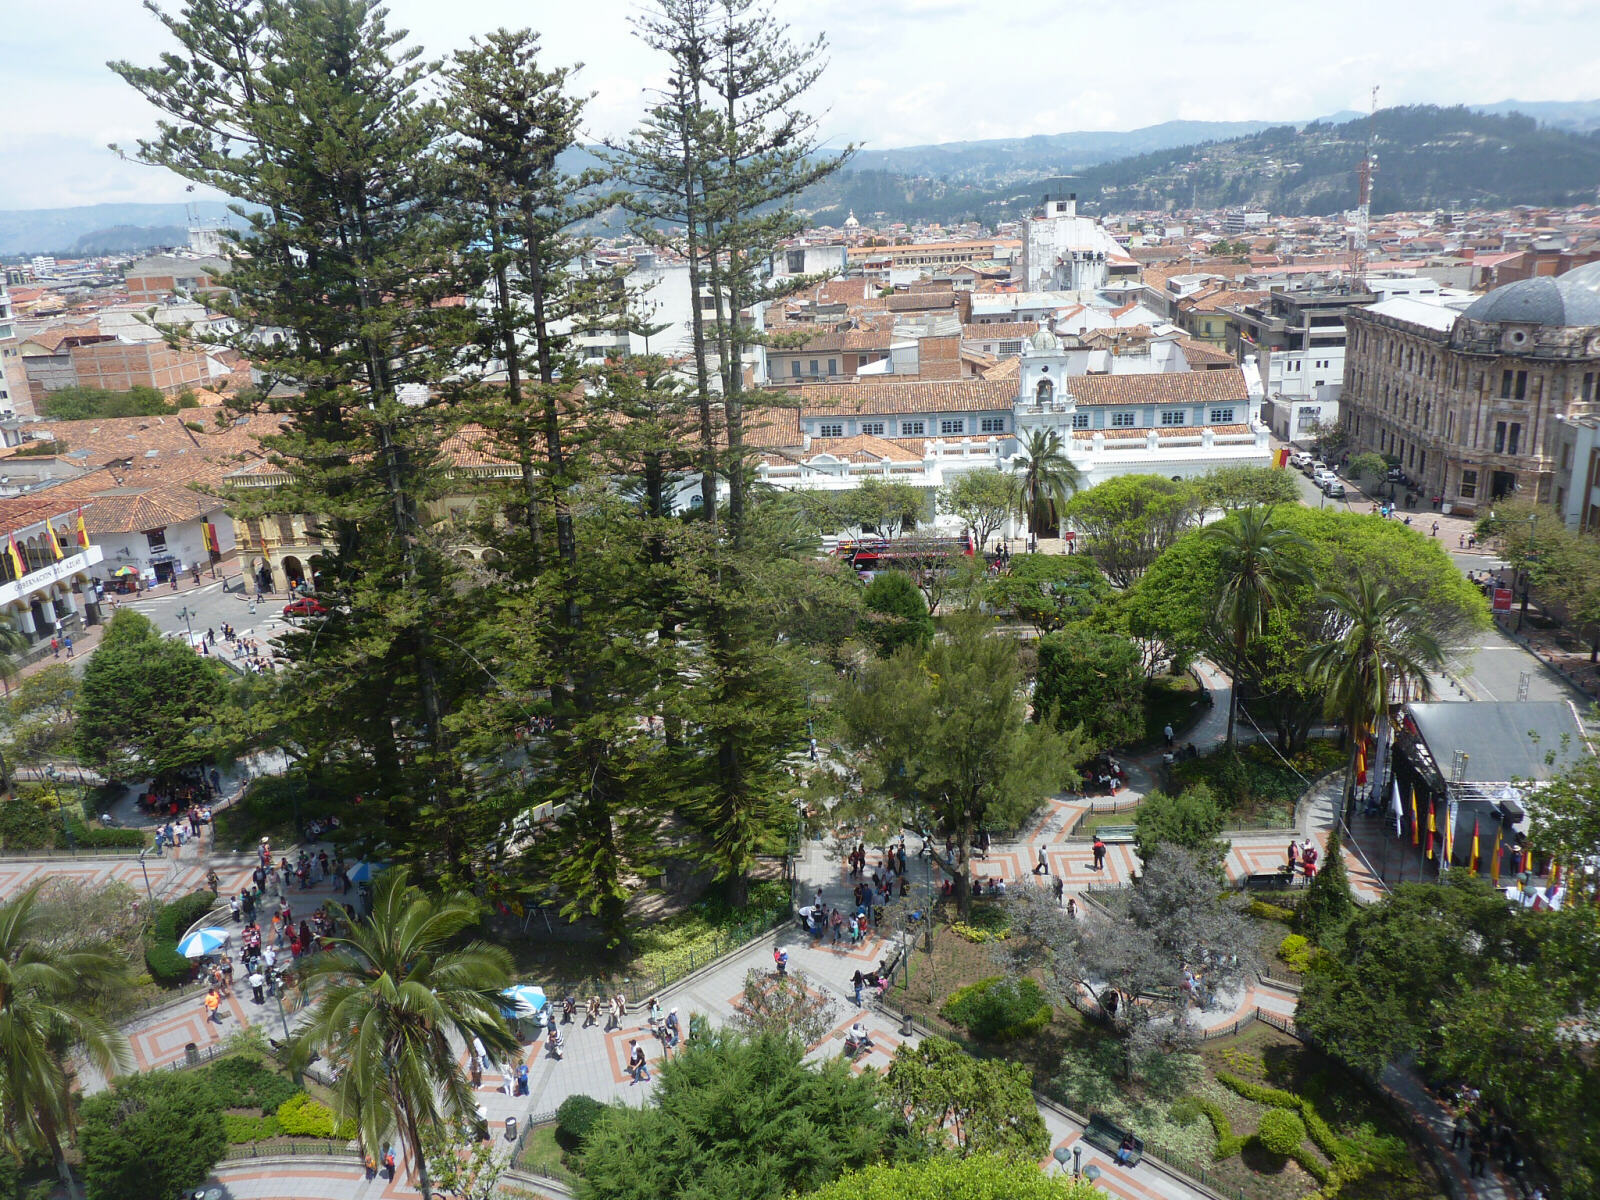 Main square from the Cathedral roof, Cuenca, Ecuador